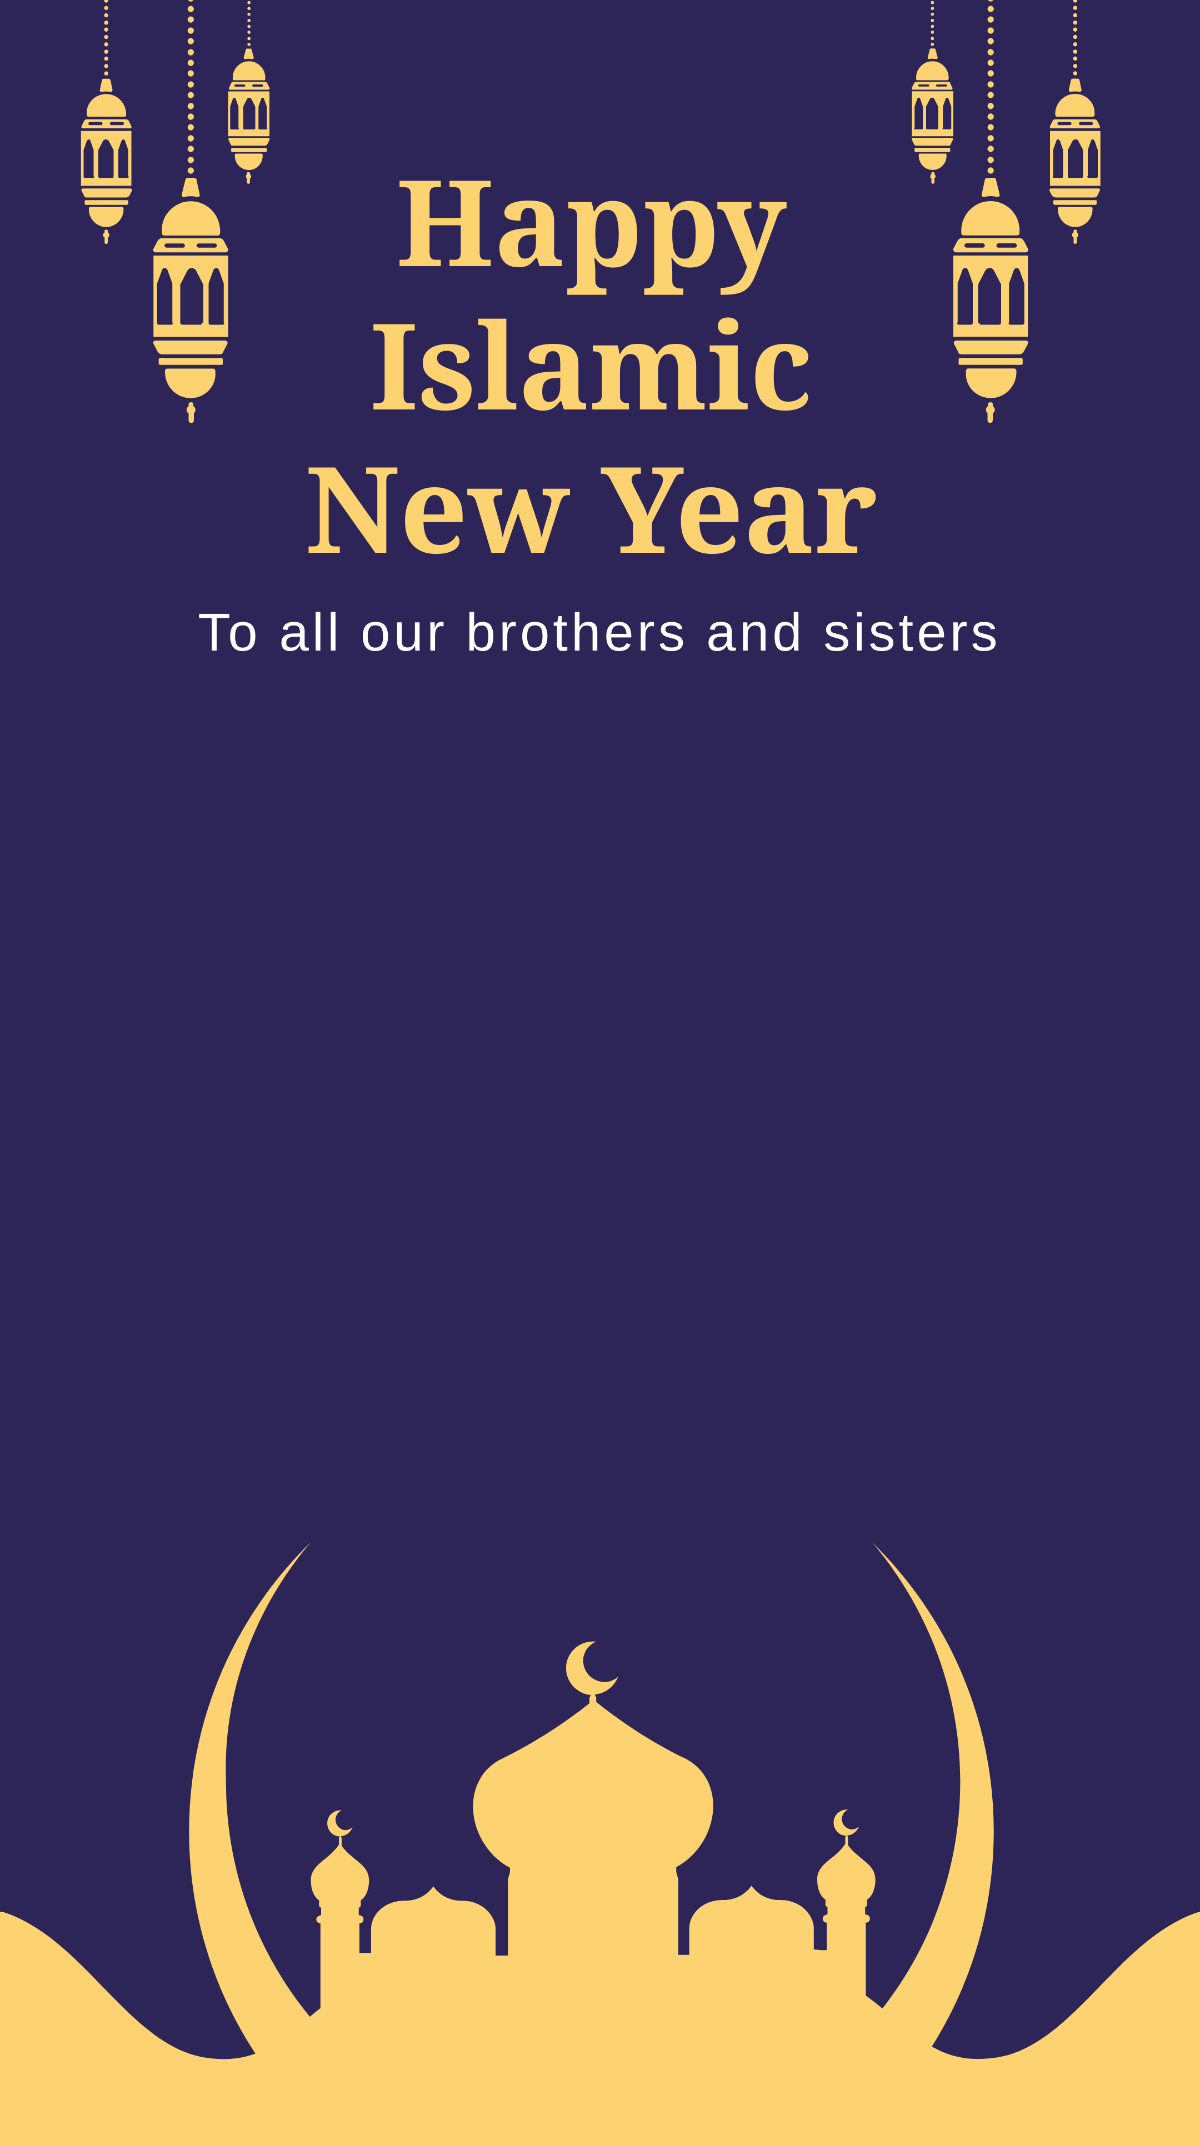 Free Islamic New Year Snapchat Geofilter Template